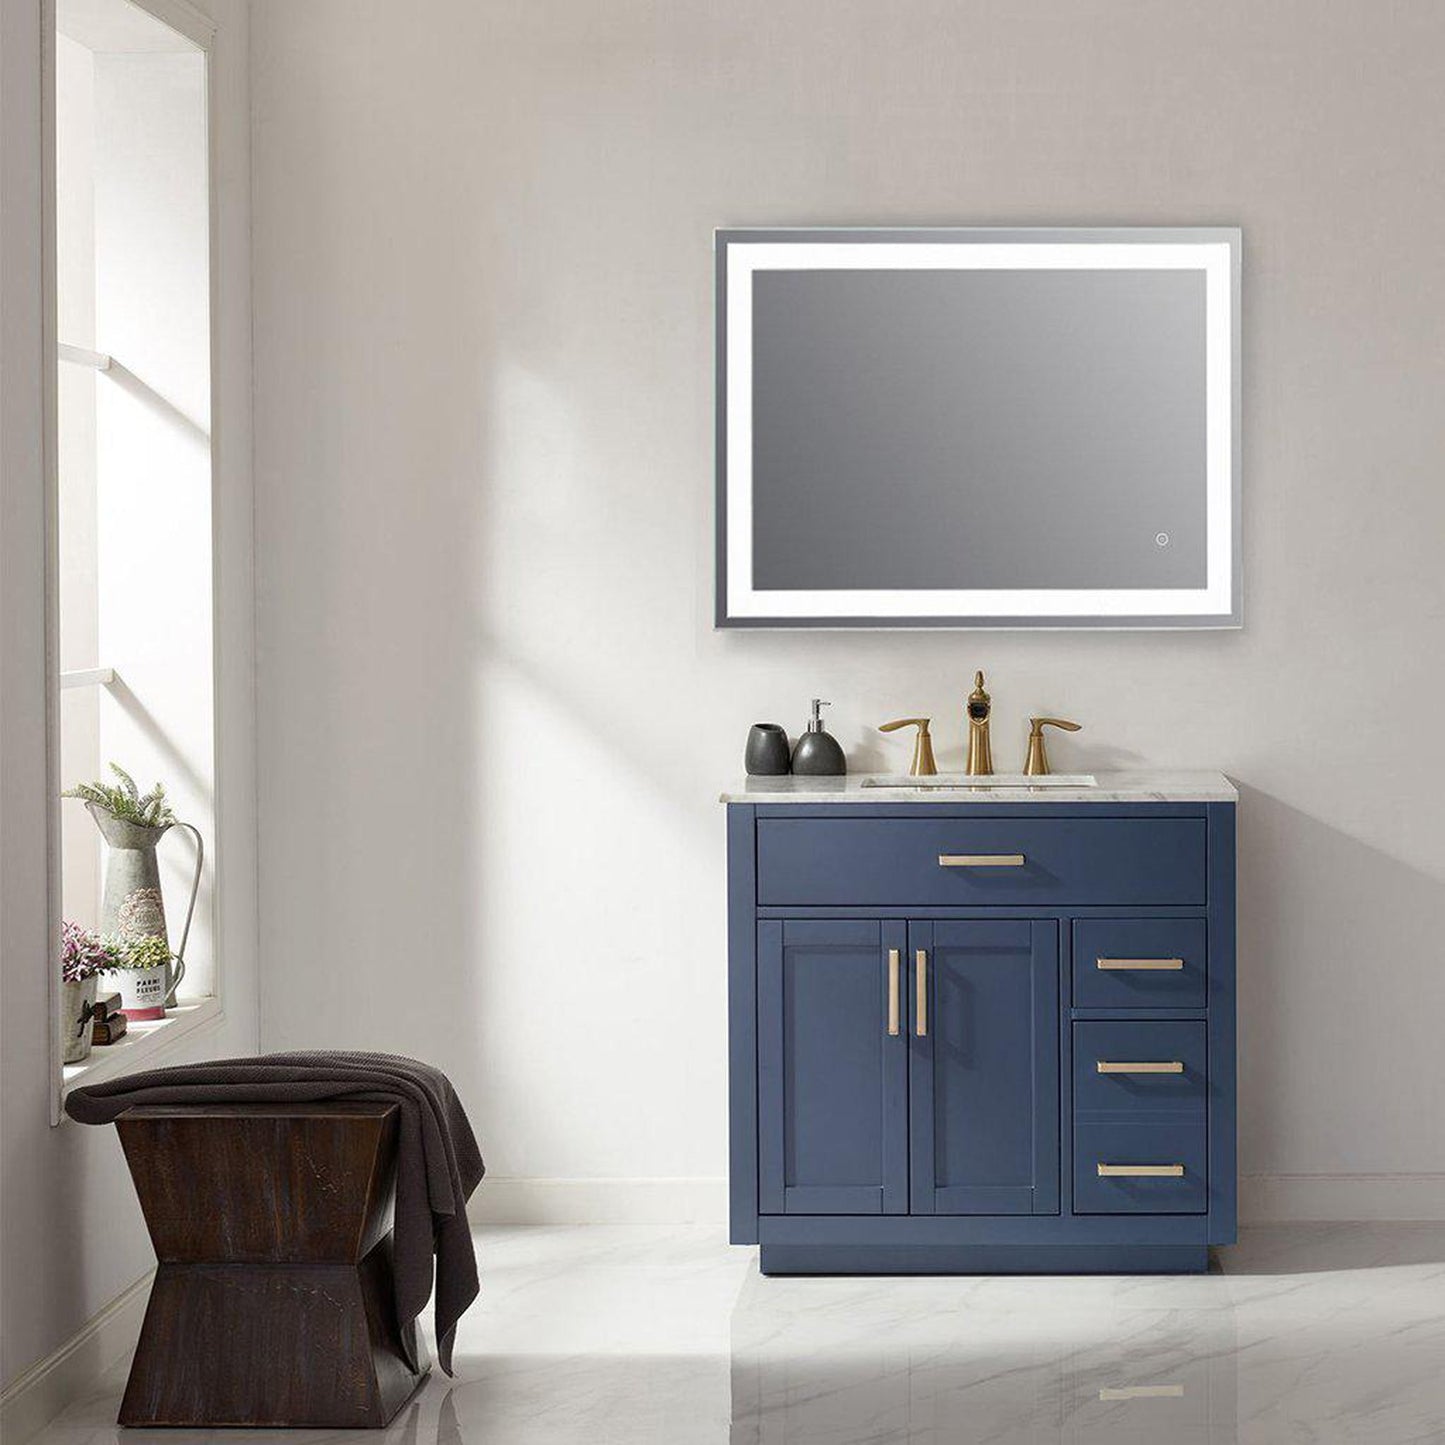 Altair Genova 36" Rectangle Wall-Mounted LED Mirror